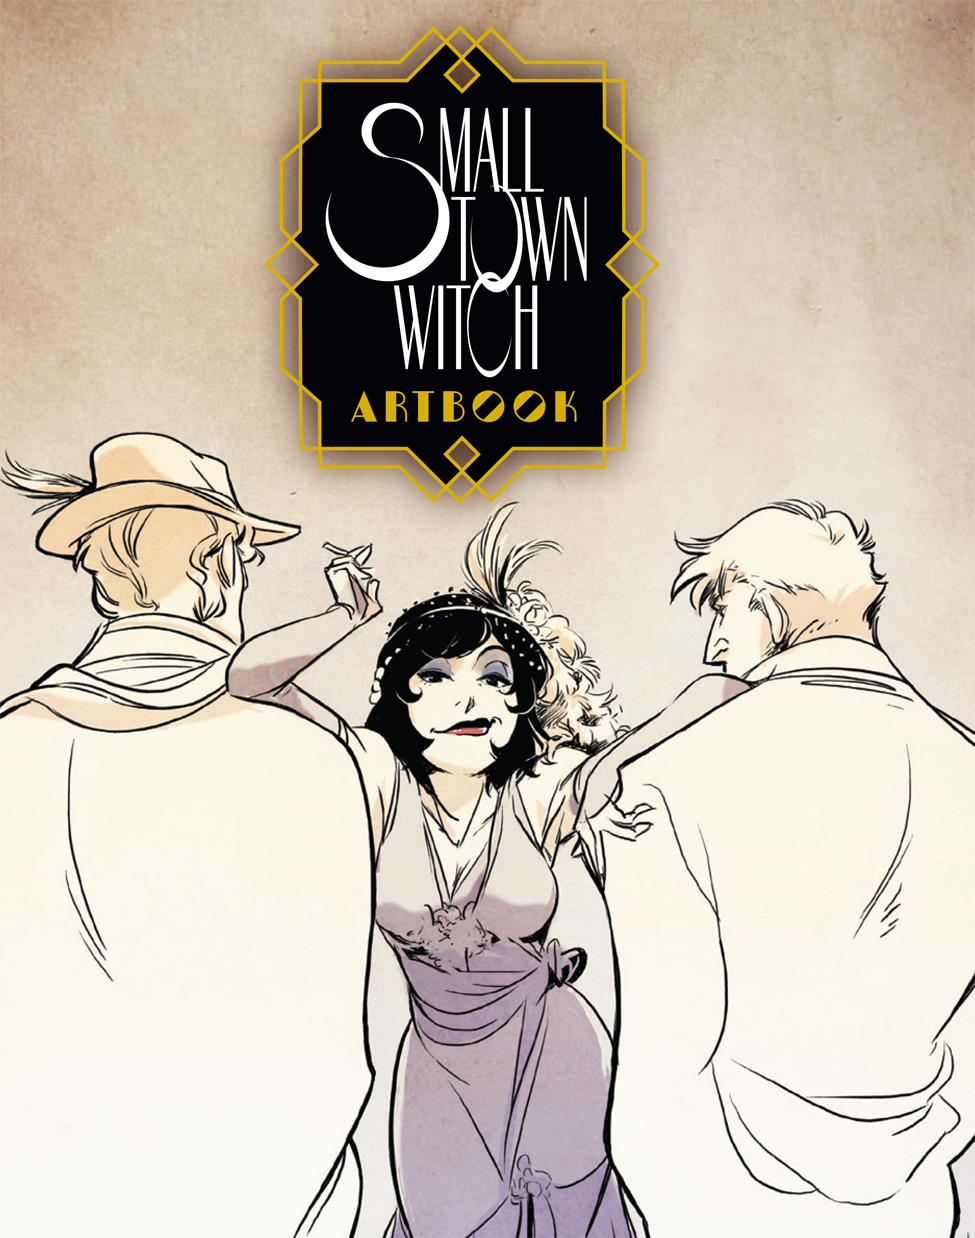 Small Town Witch (KS Artbook)